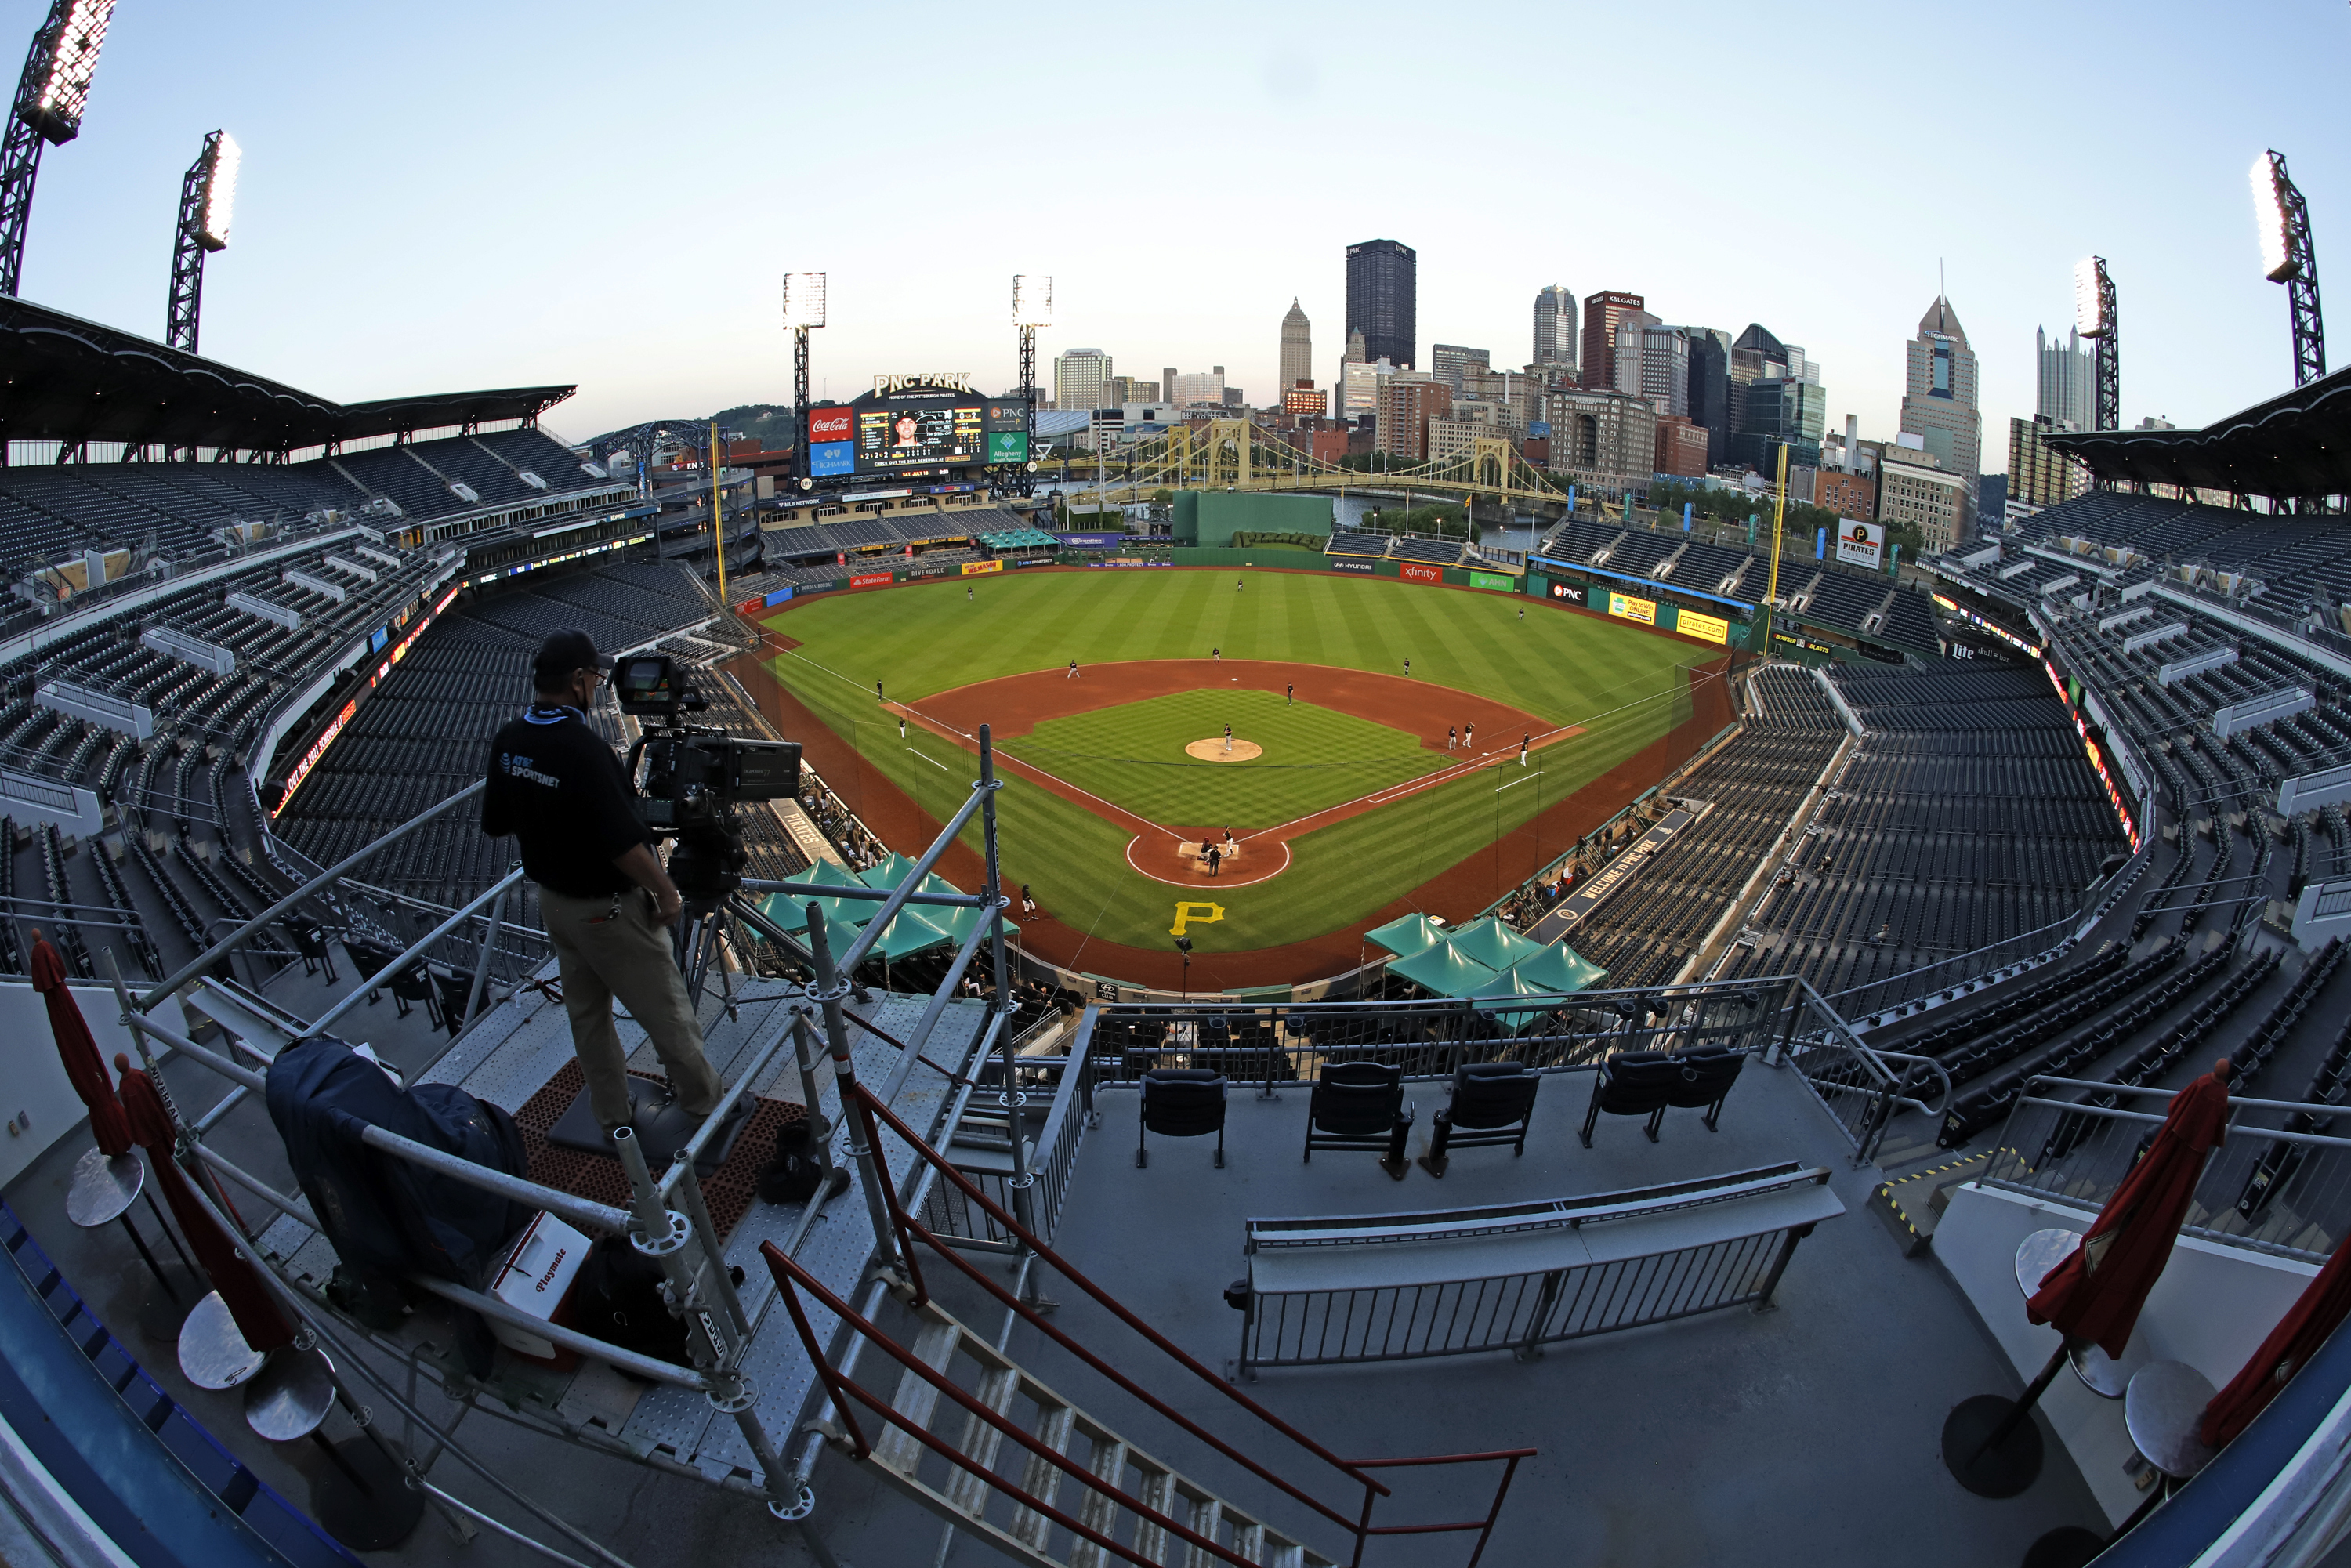 PNC Park will open at full capacity